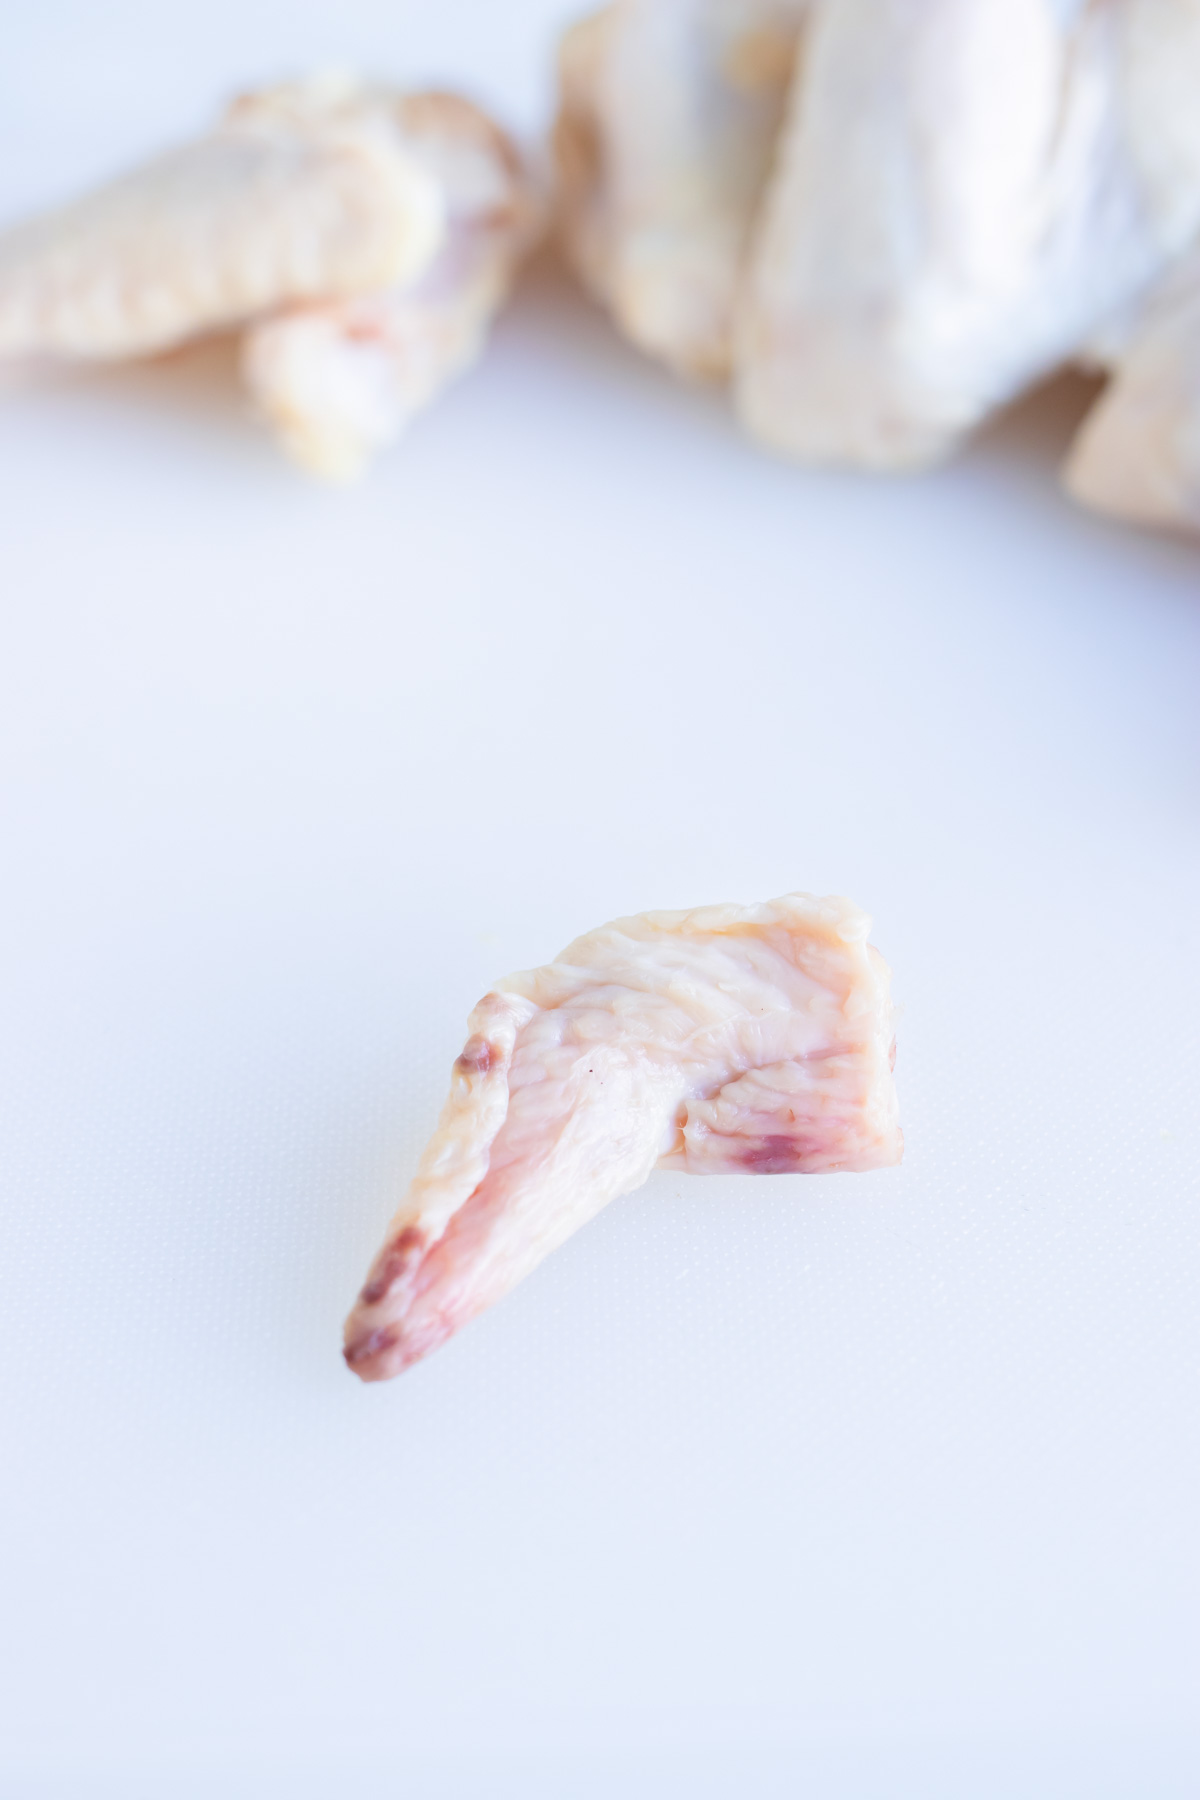 The tip of a chicken wing is shown on the counter.